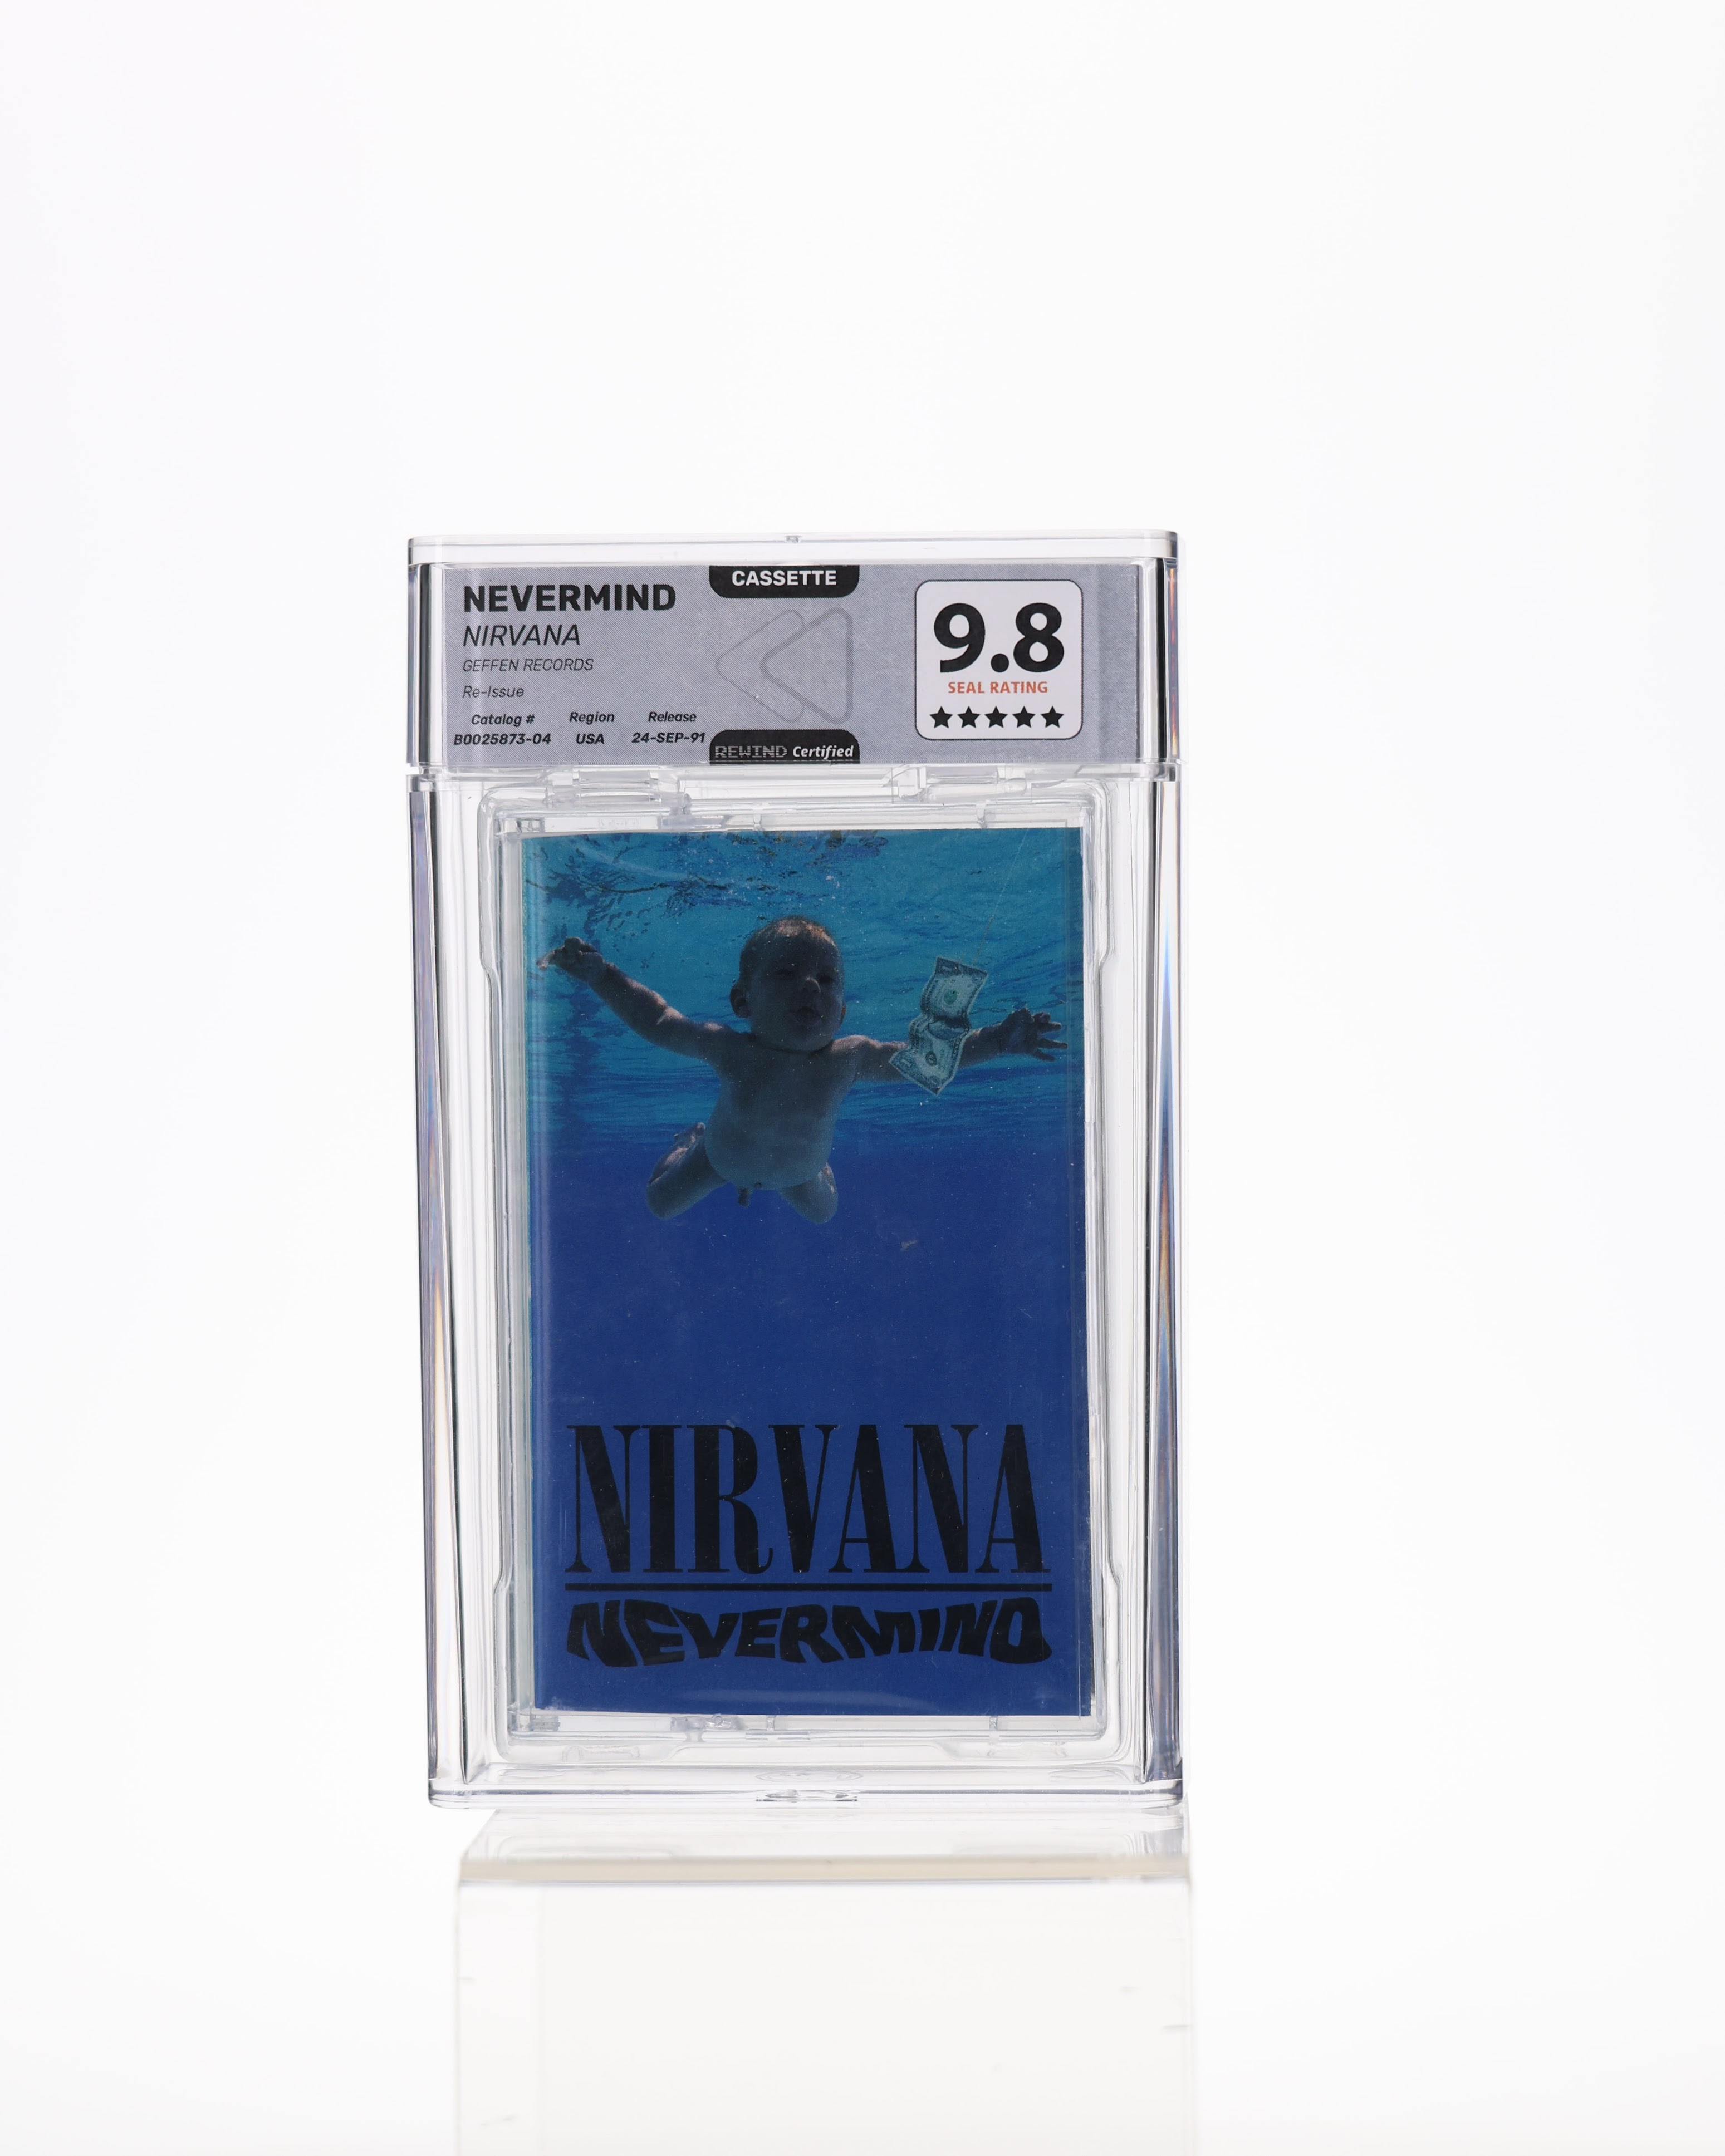 Rewind Rocks Collectibles with the Advent of Music Grading